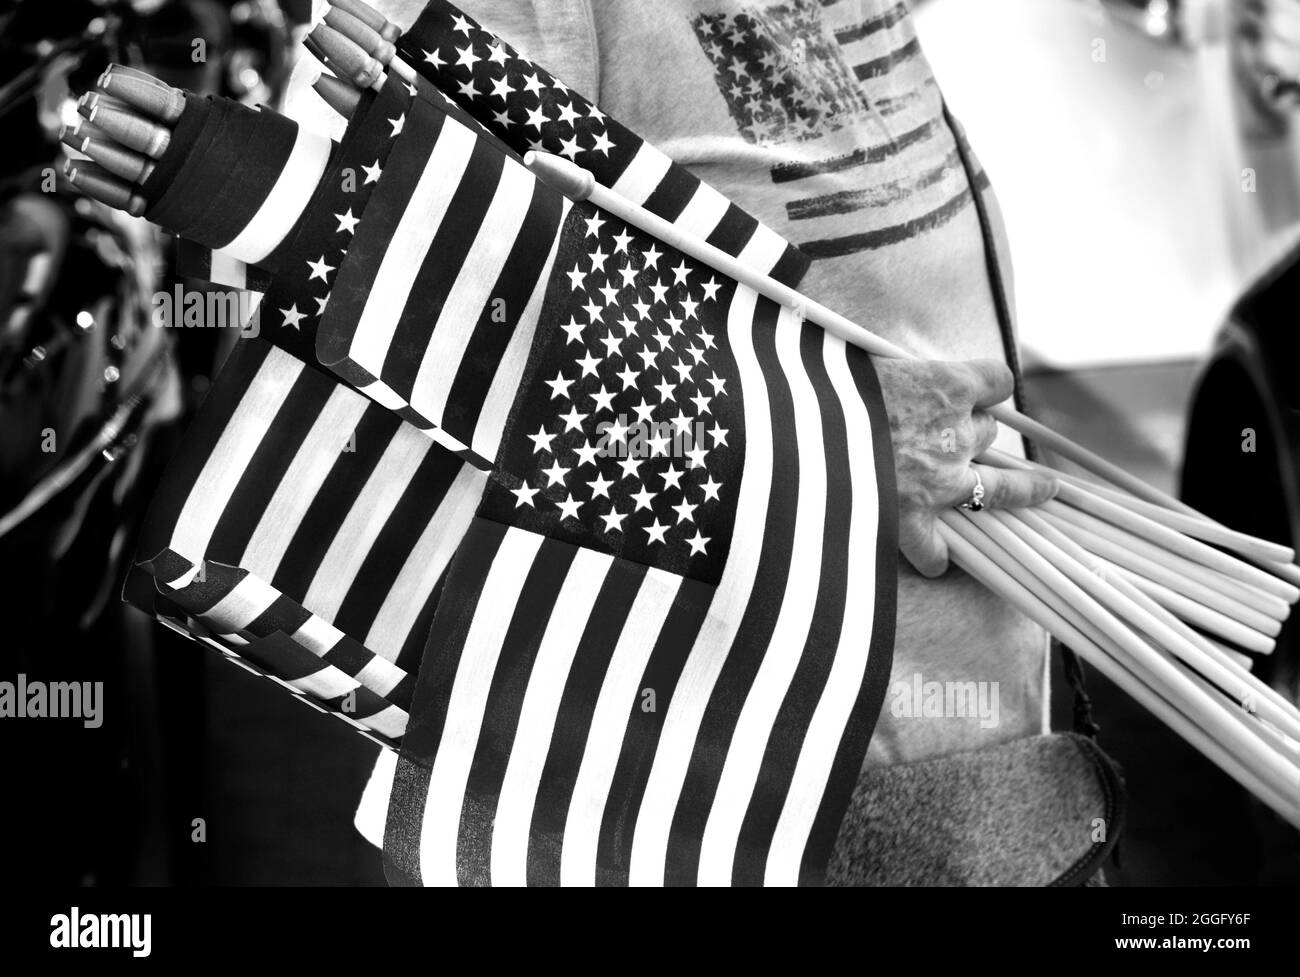 A woman distributes small American flags at a Fourth of July vintage car show in Santa Fe, New Mexico. Stock Photo